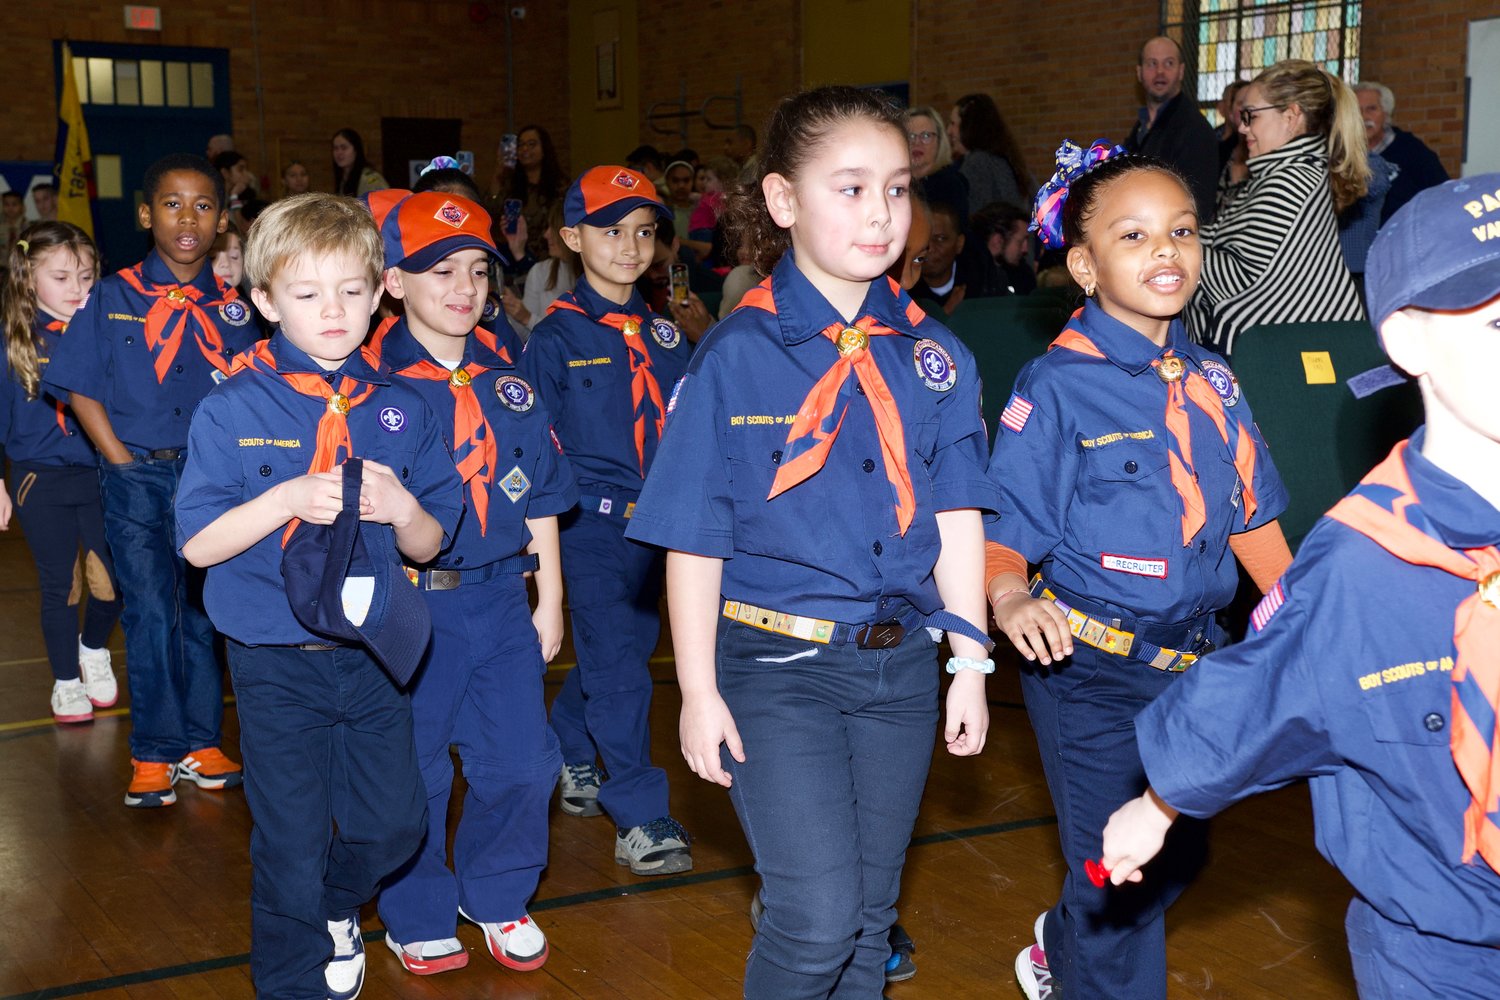 Valley Stream scouts were excited to take part in the ranking up ceremonies on March 4.